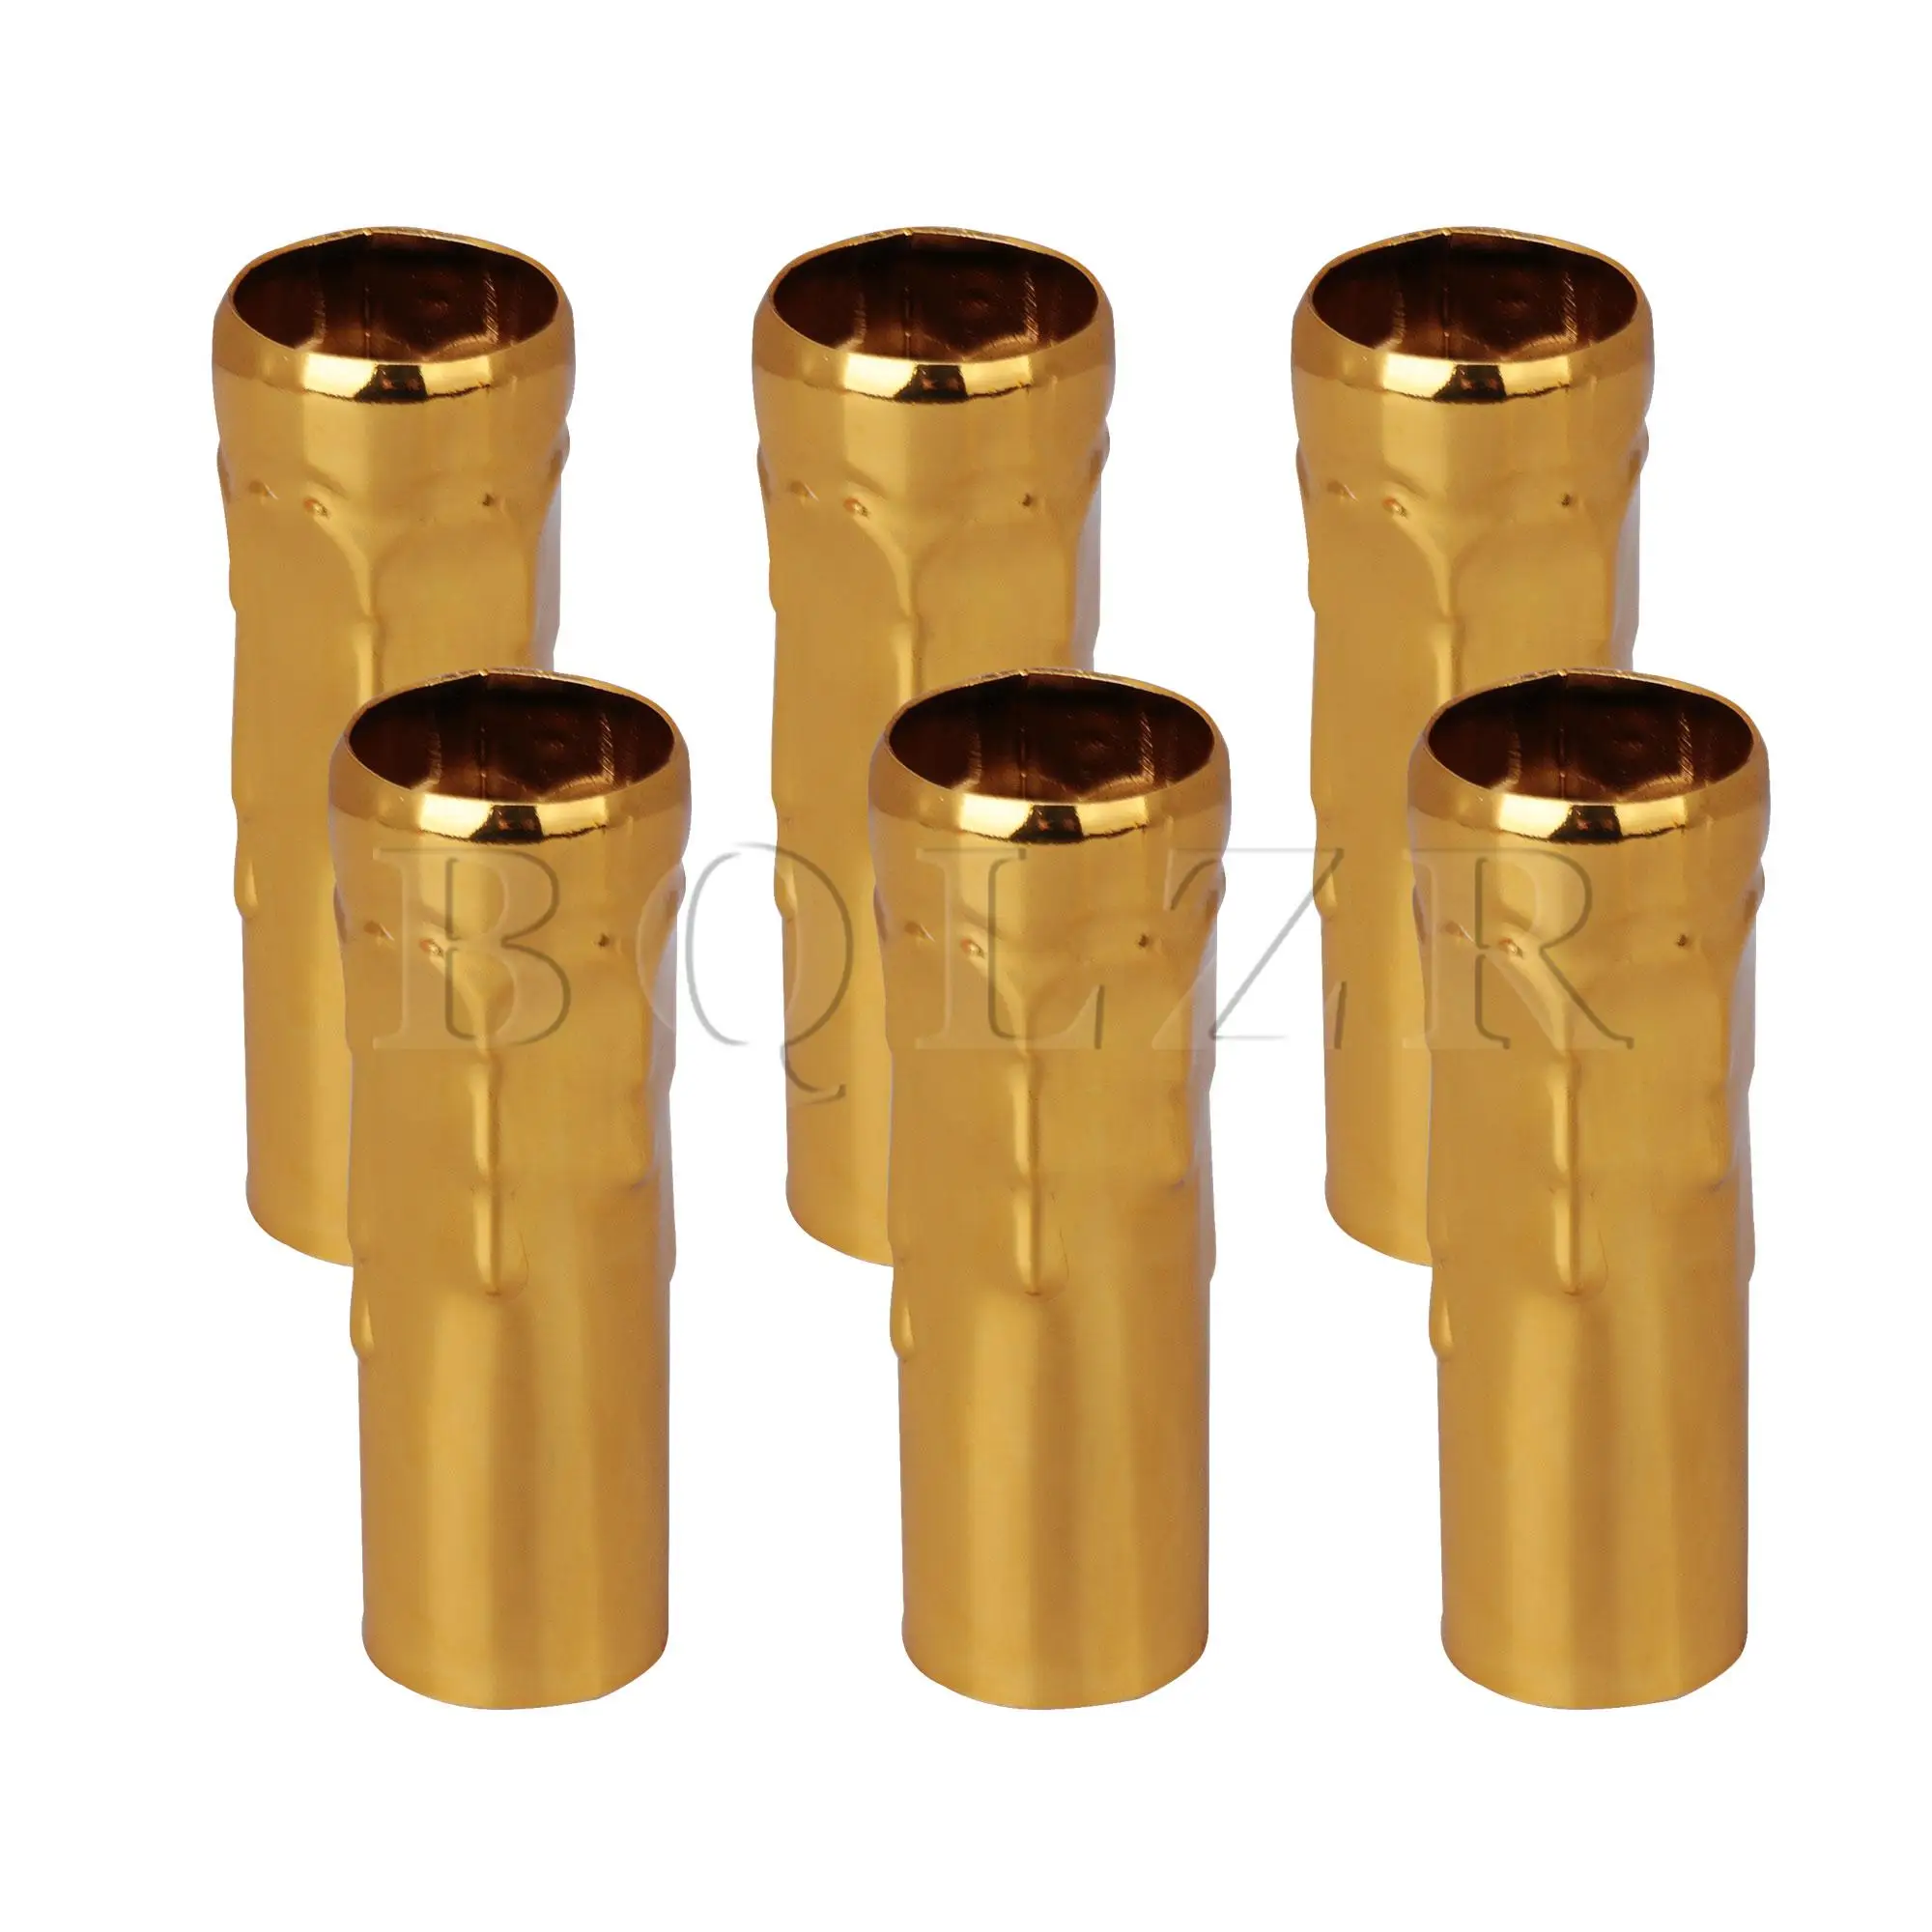 BQLZR 25mm Dia Bronze Candle Light Cover Sleeves Chandelier Base Socket Pack of 6 